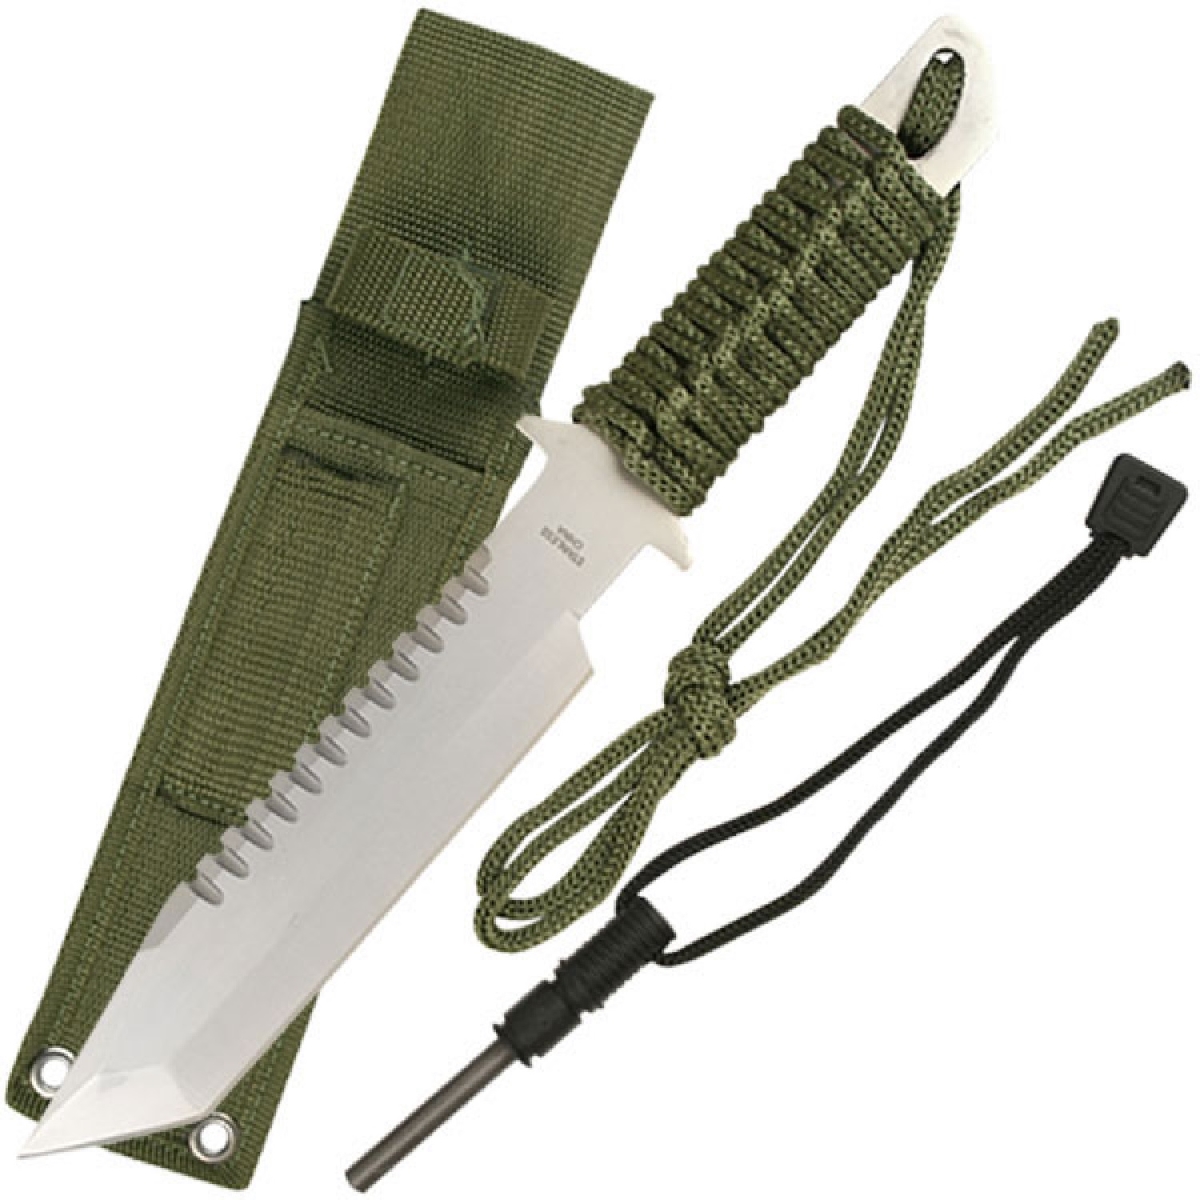 4018814 6.0 In. Fixed Knife Blade With Paracord Handle